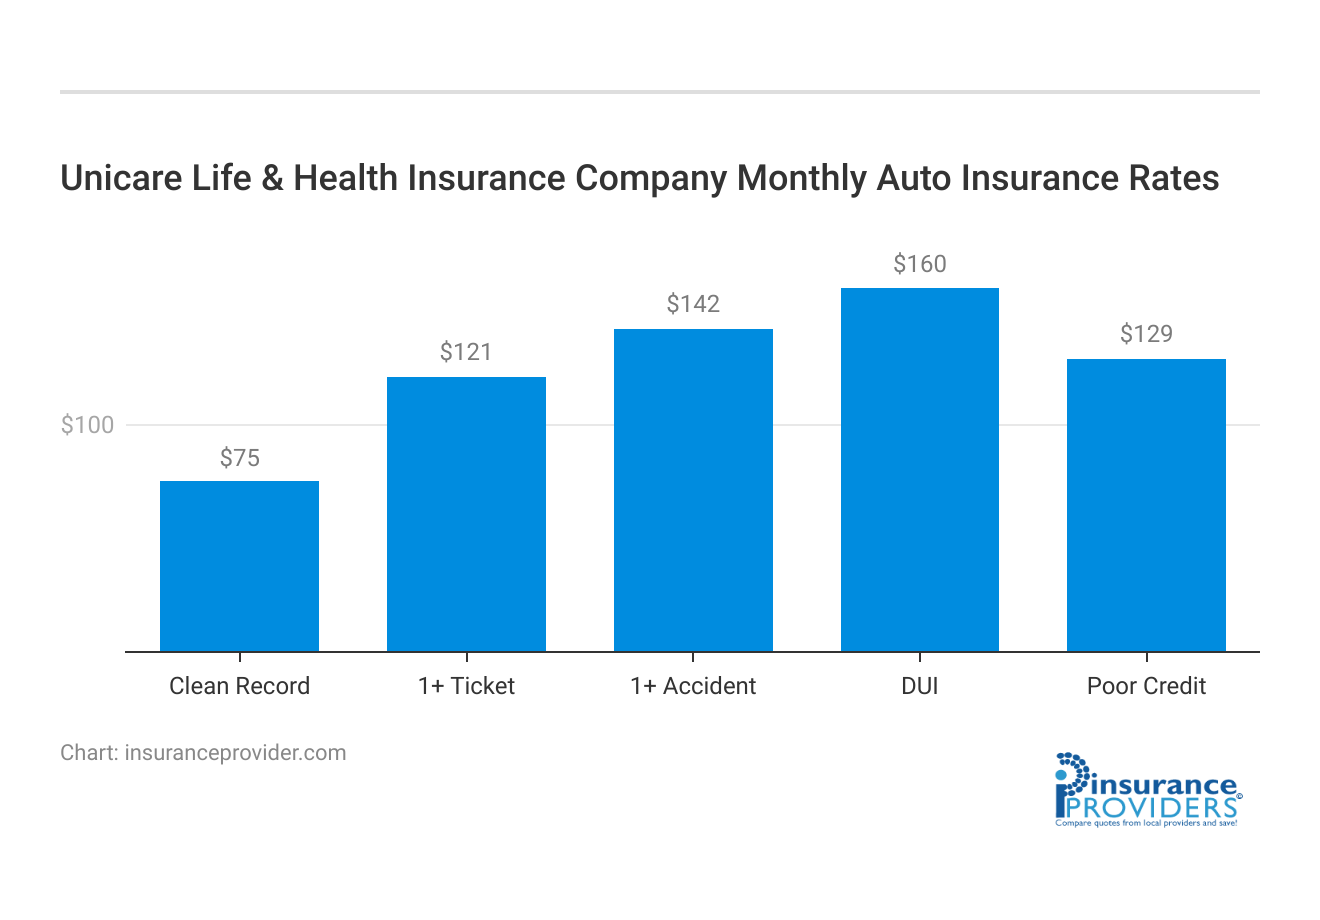 <h3>Unicare Life & Health Insurance Company Monthly Auto Insurance Rates</h3>